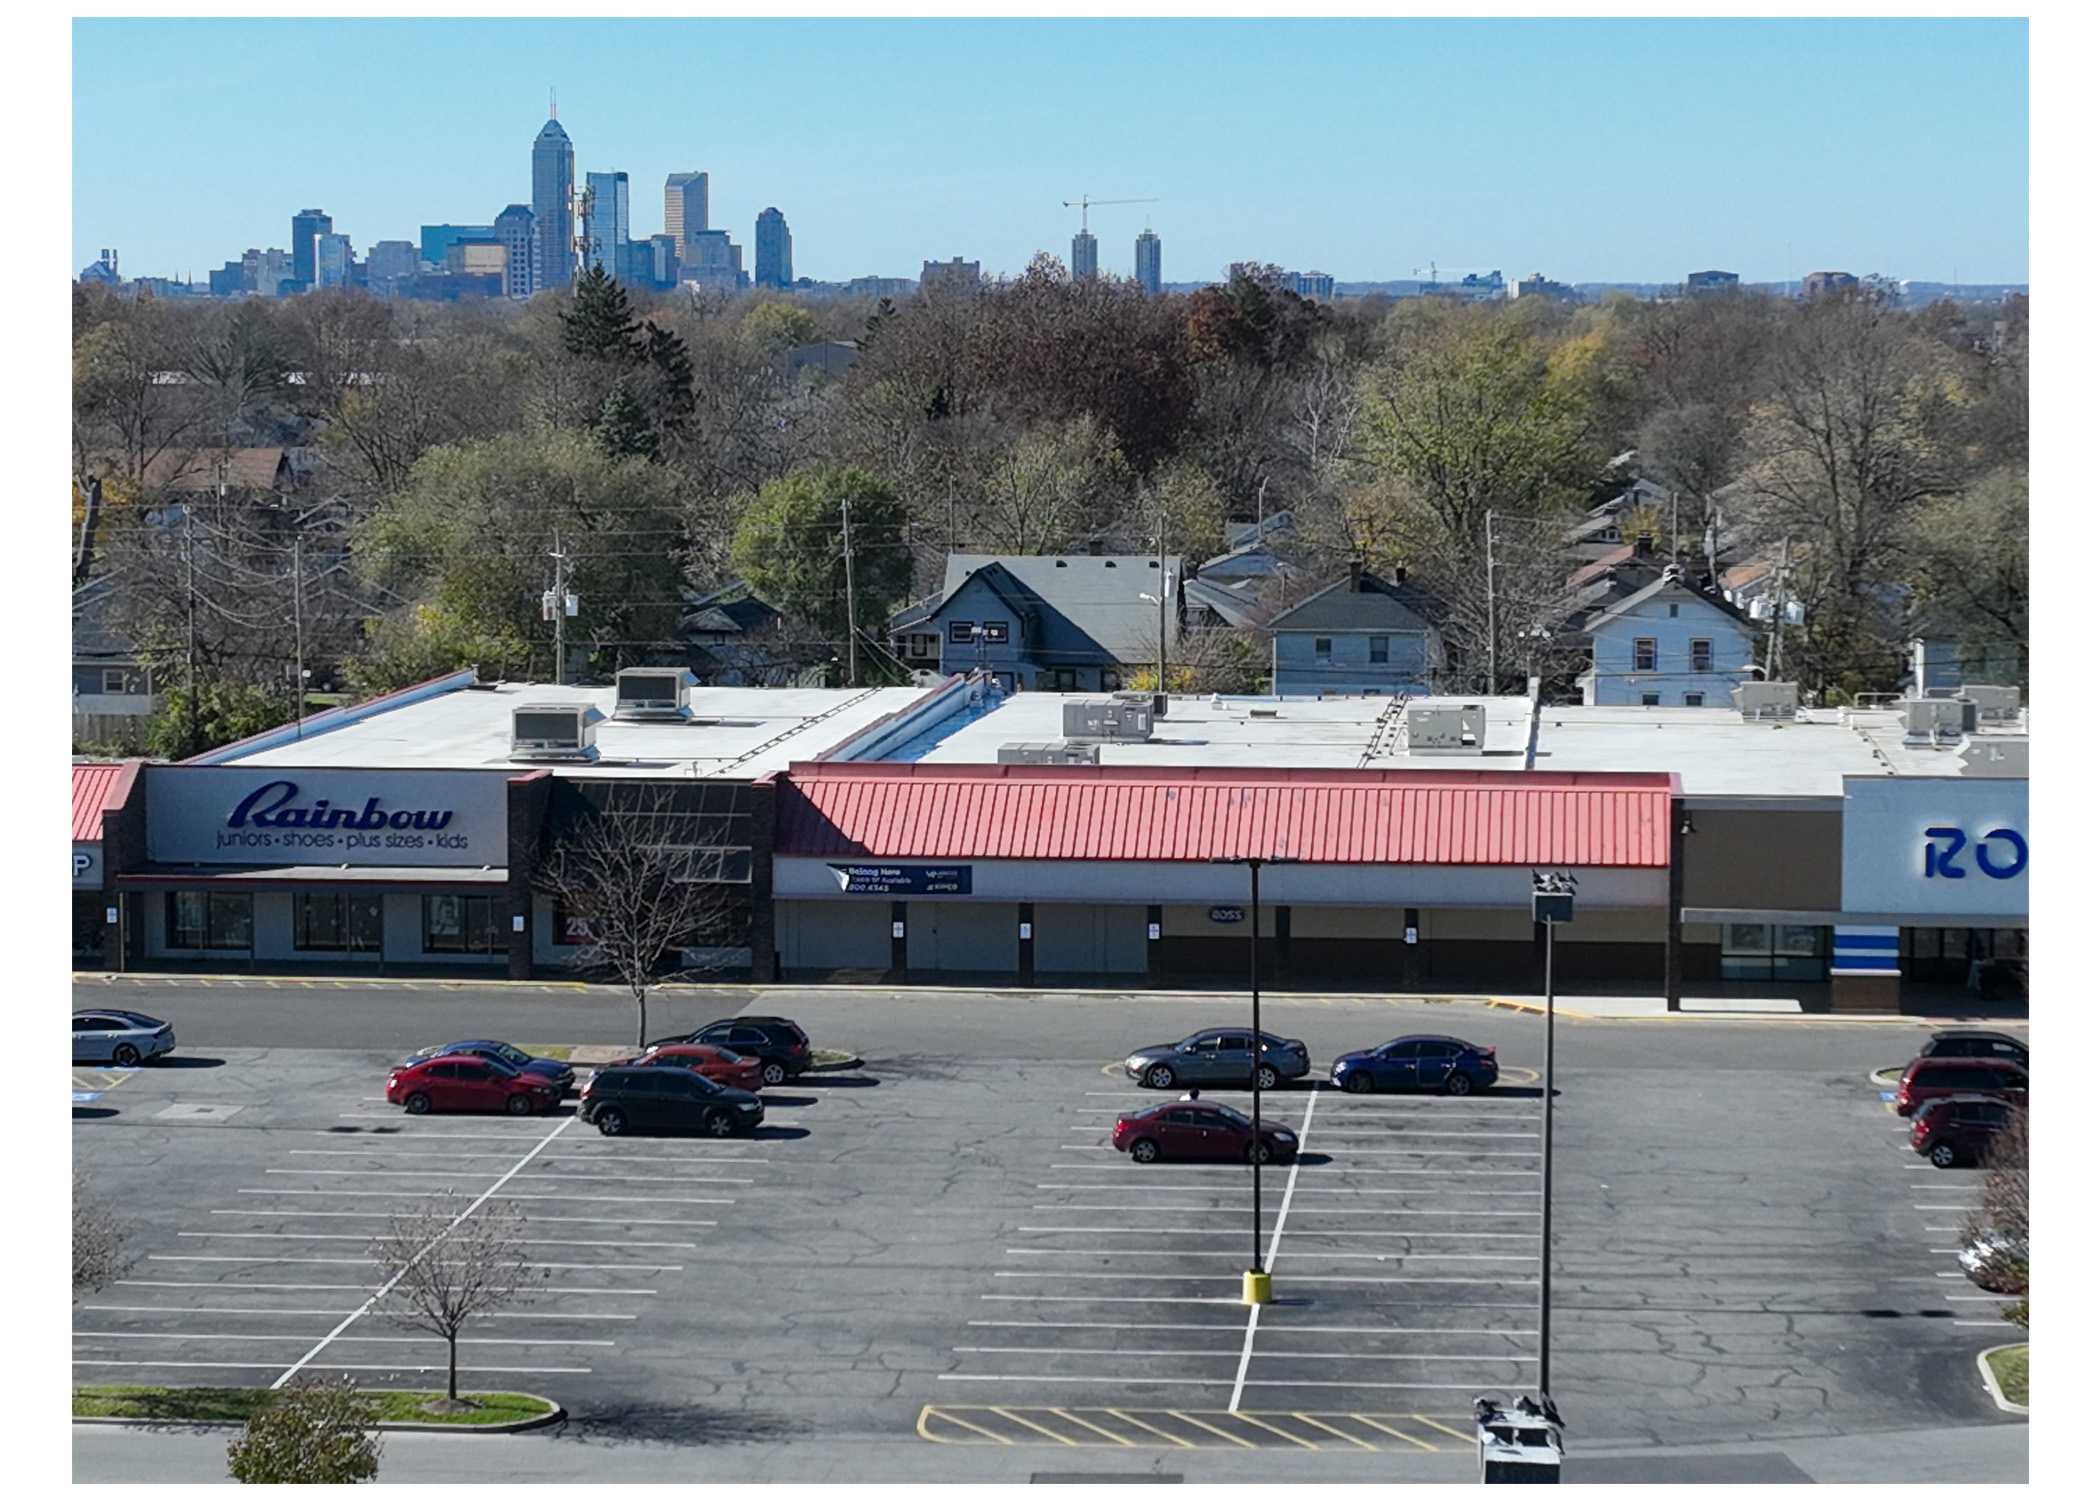 Linwood Square, Rainbow, Ross Dress For Less, and parking lot. Aerial view with Indianapolis skyline behind Rainbow and Ross